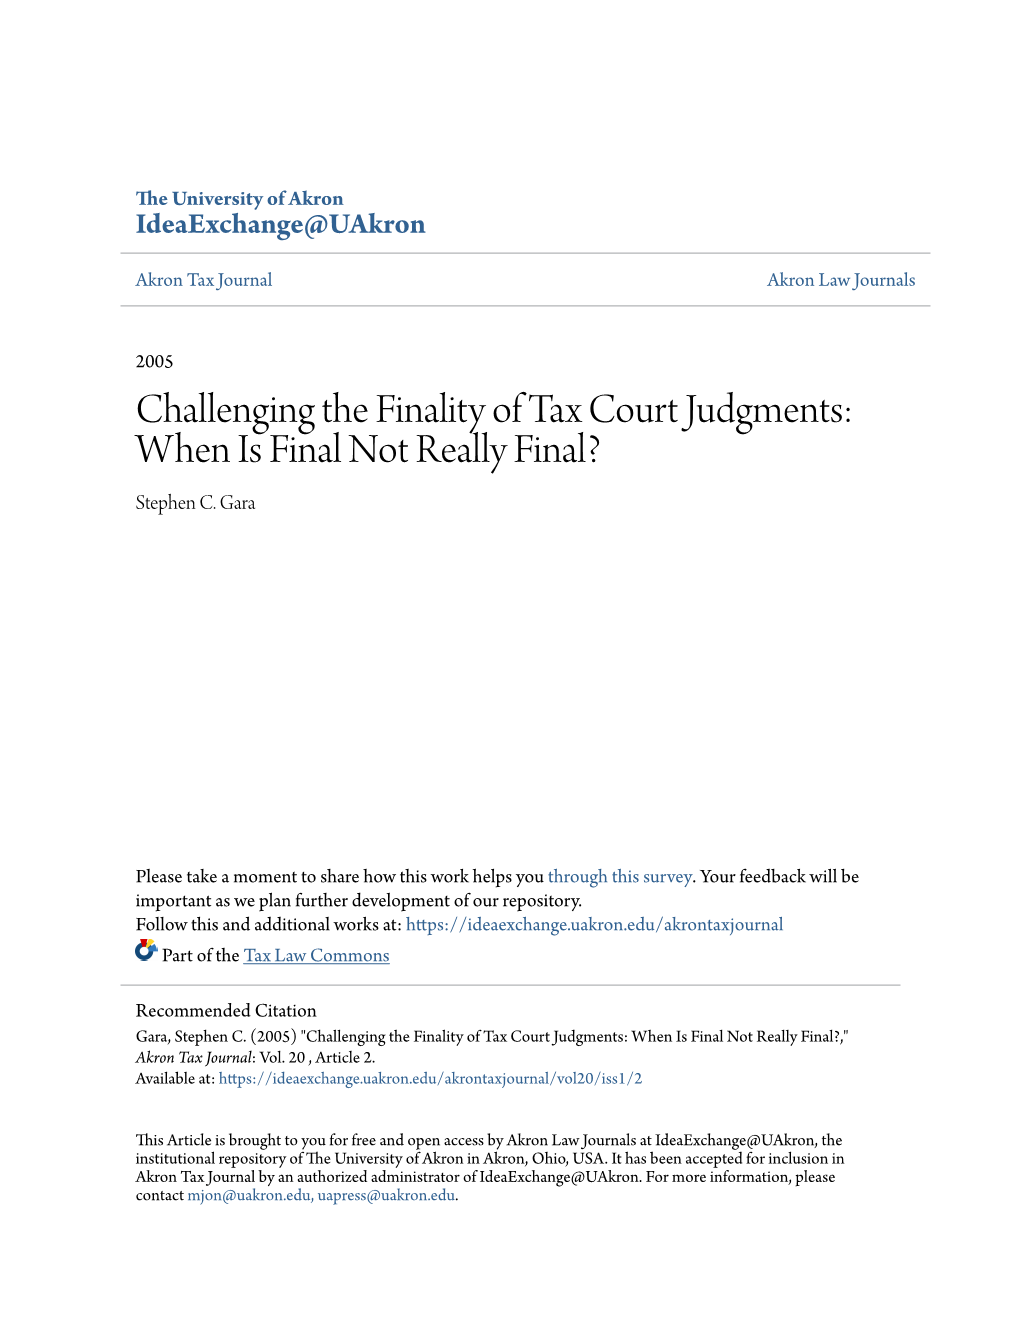 Challenging the Finality of Tax Court Judgments: When Is Final Not Really Final? Stephen C